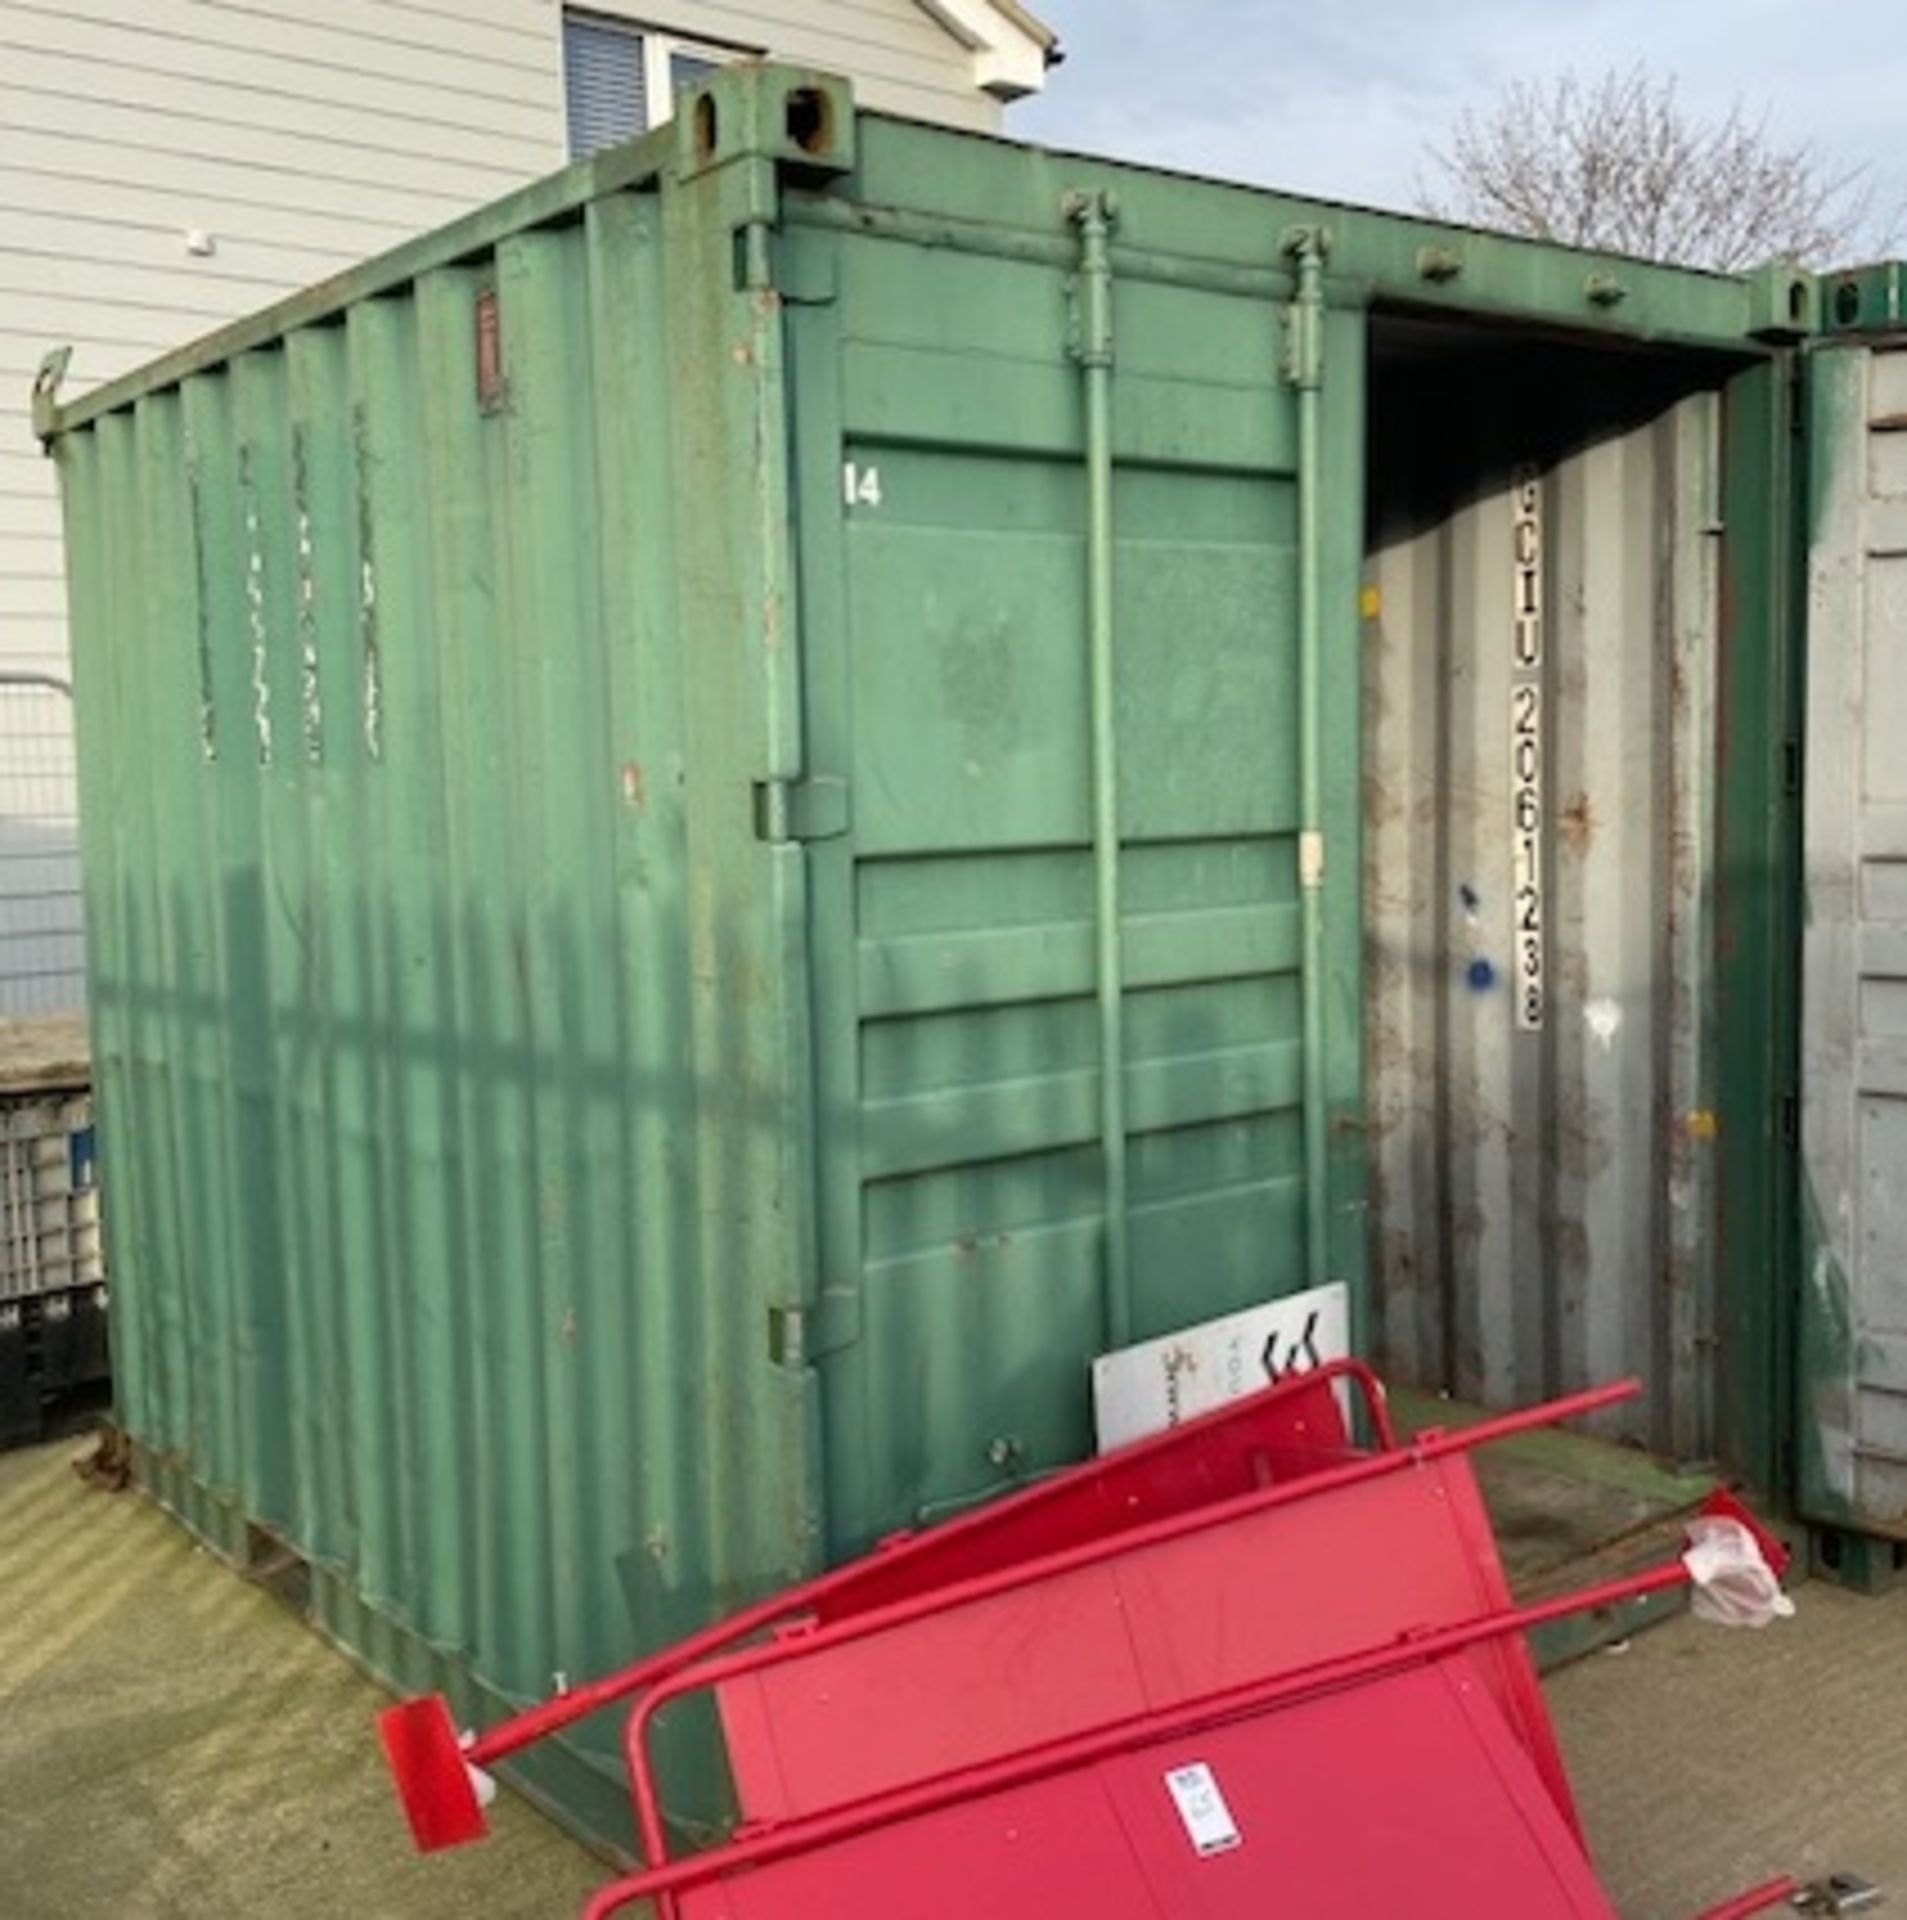 10ft Site Container, ID14 (Location: March, Cambridge. Please Refer to General Notes)